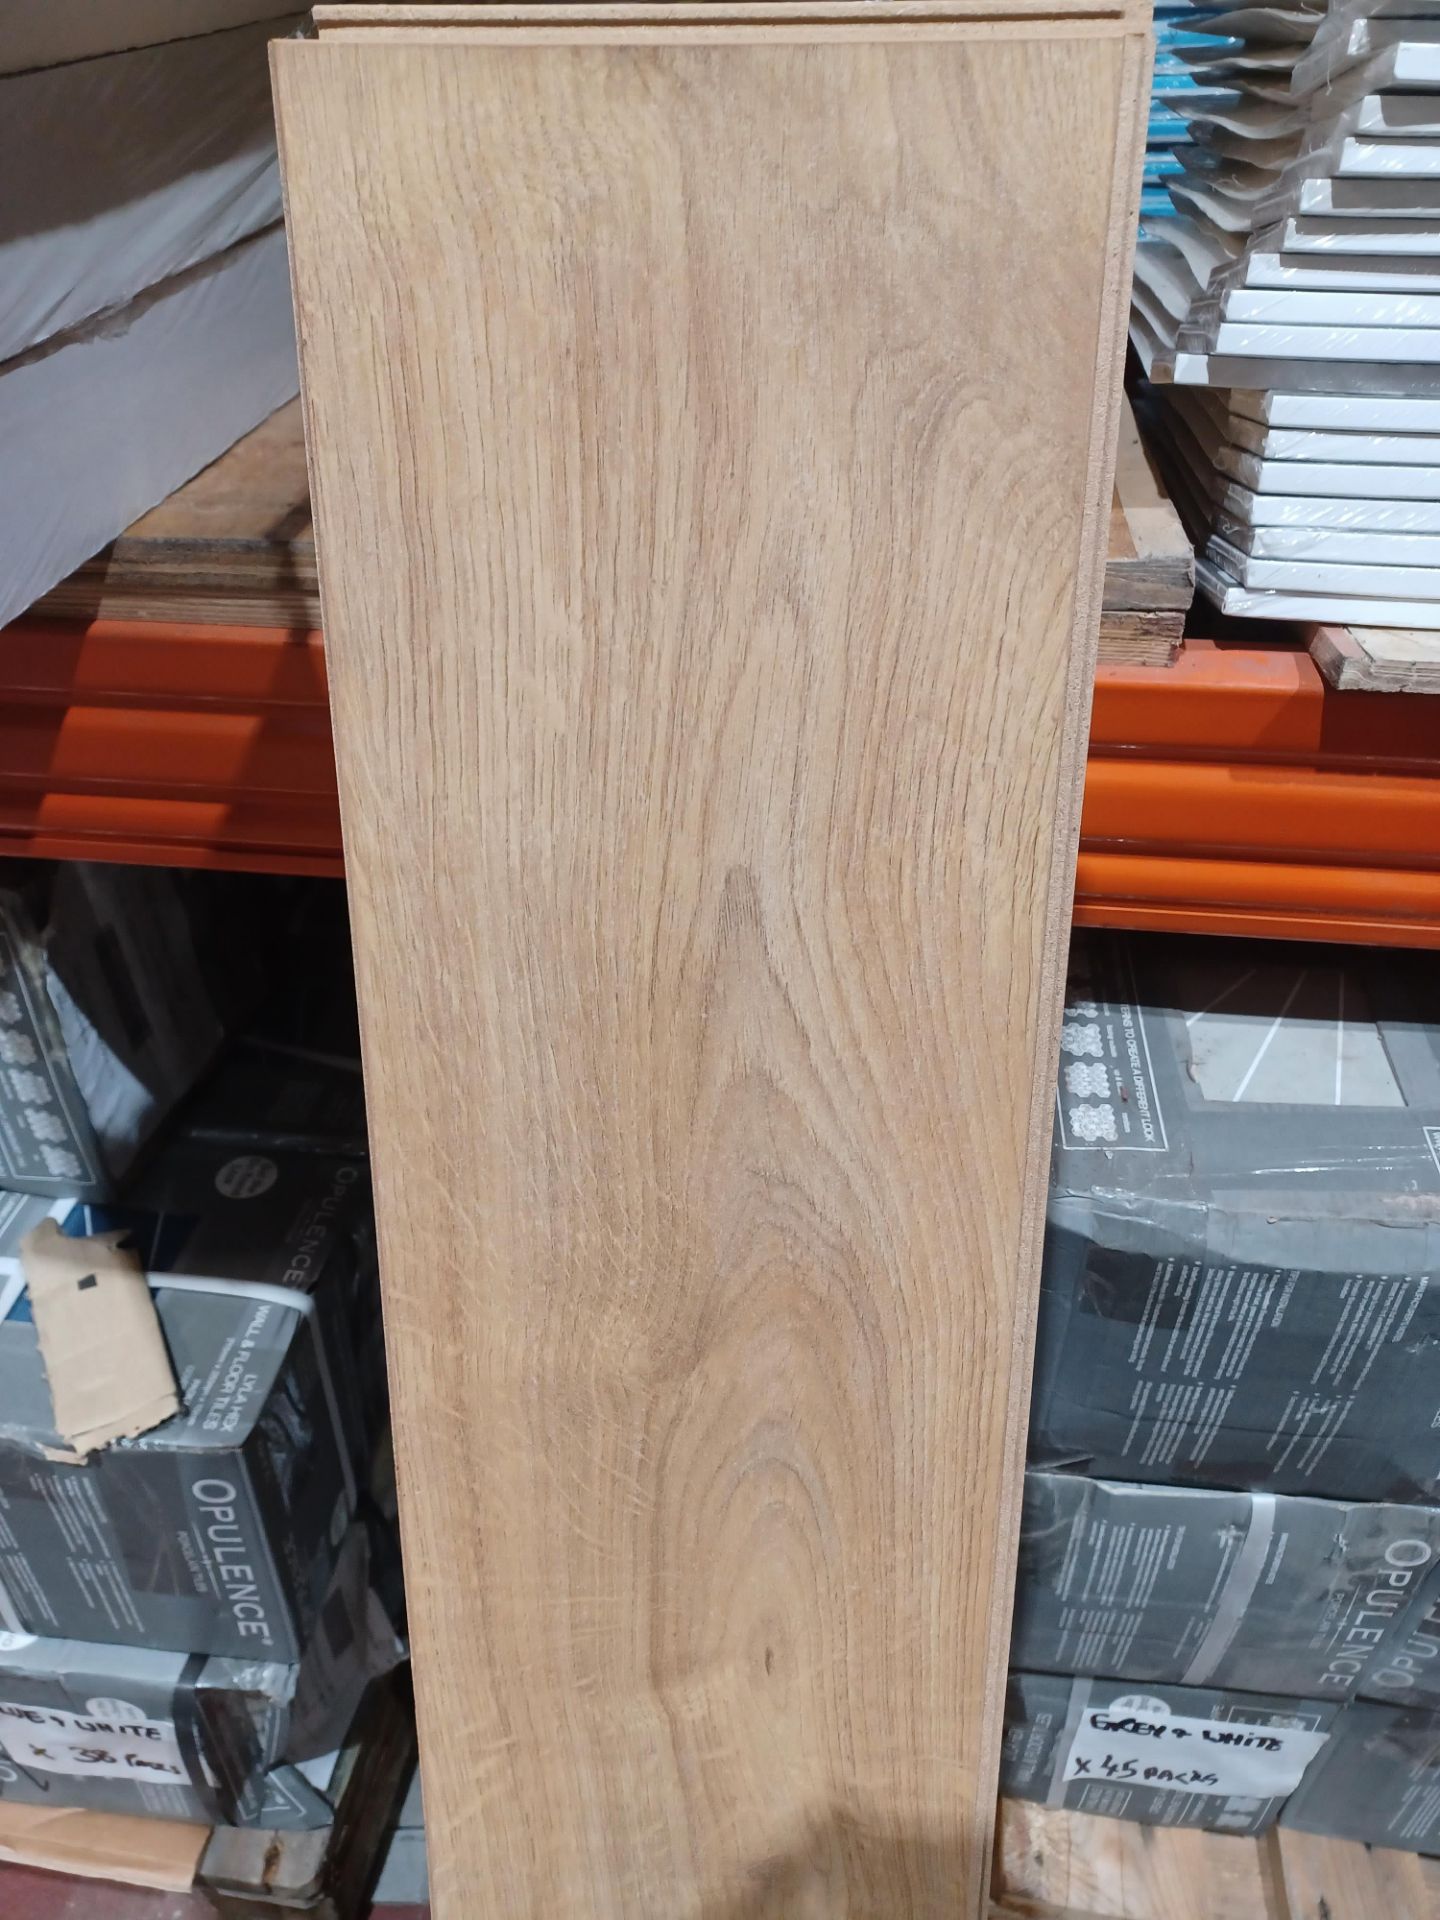 10 x Packs of Ravensdale Oak Flooring 1.48m2 giving this a coverage of 14.8m2 - R14 - Image 2 of 2